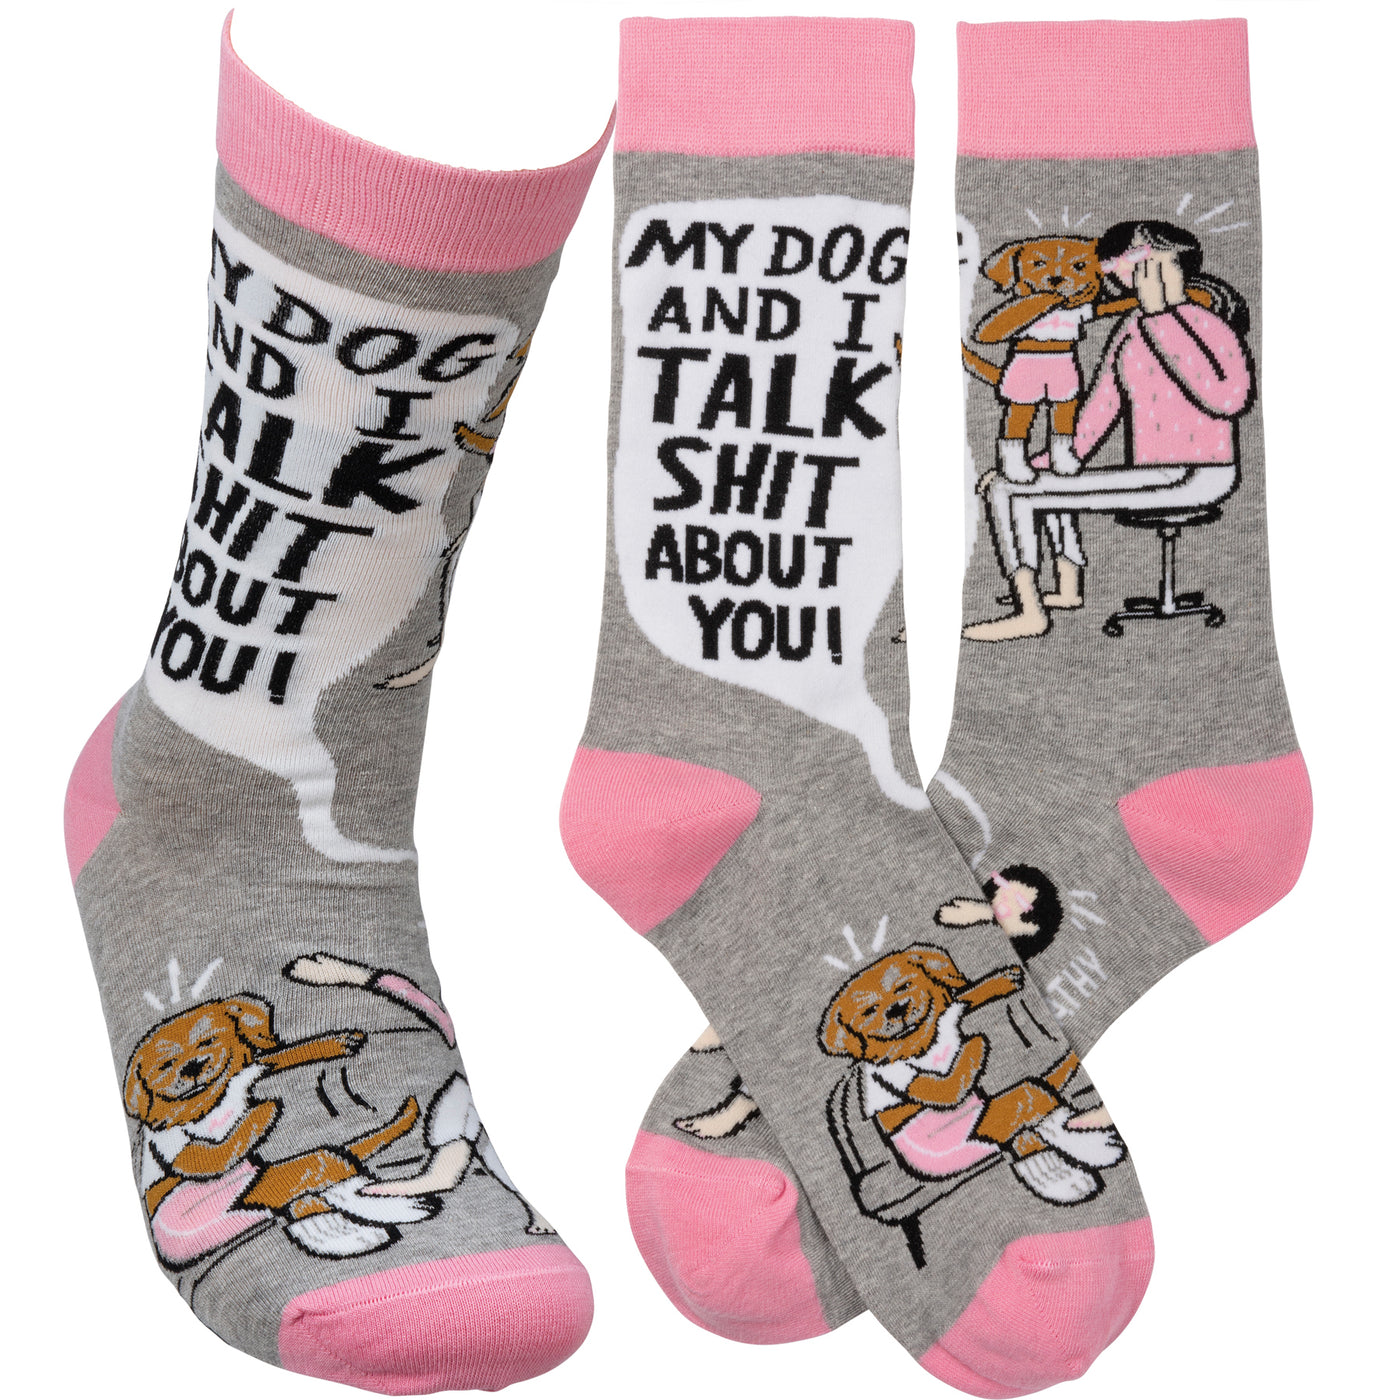 Socks - My Dog And I Talk About You